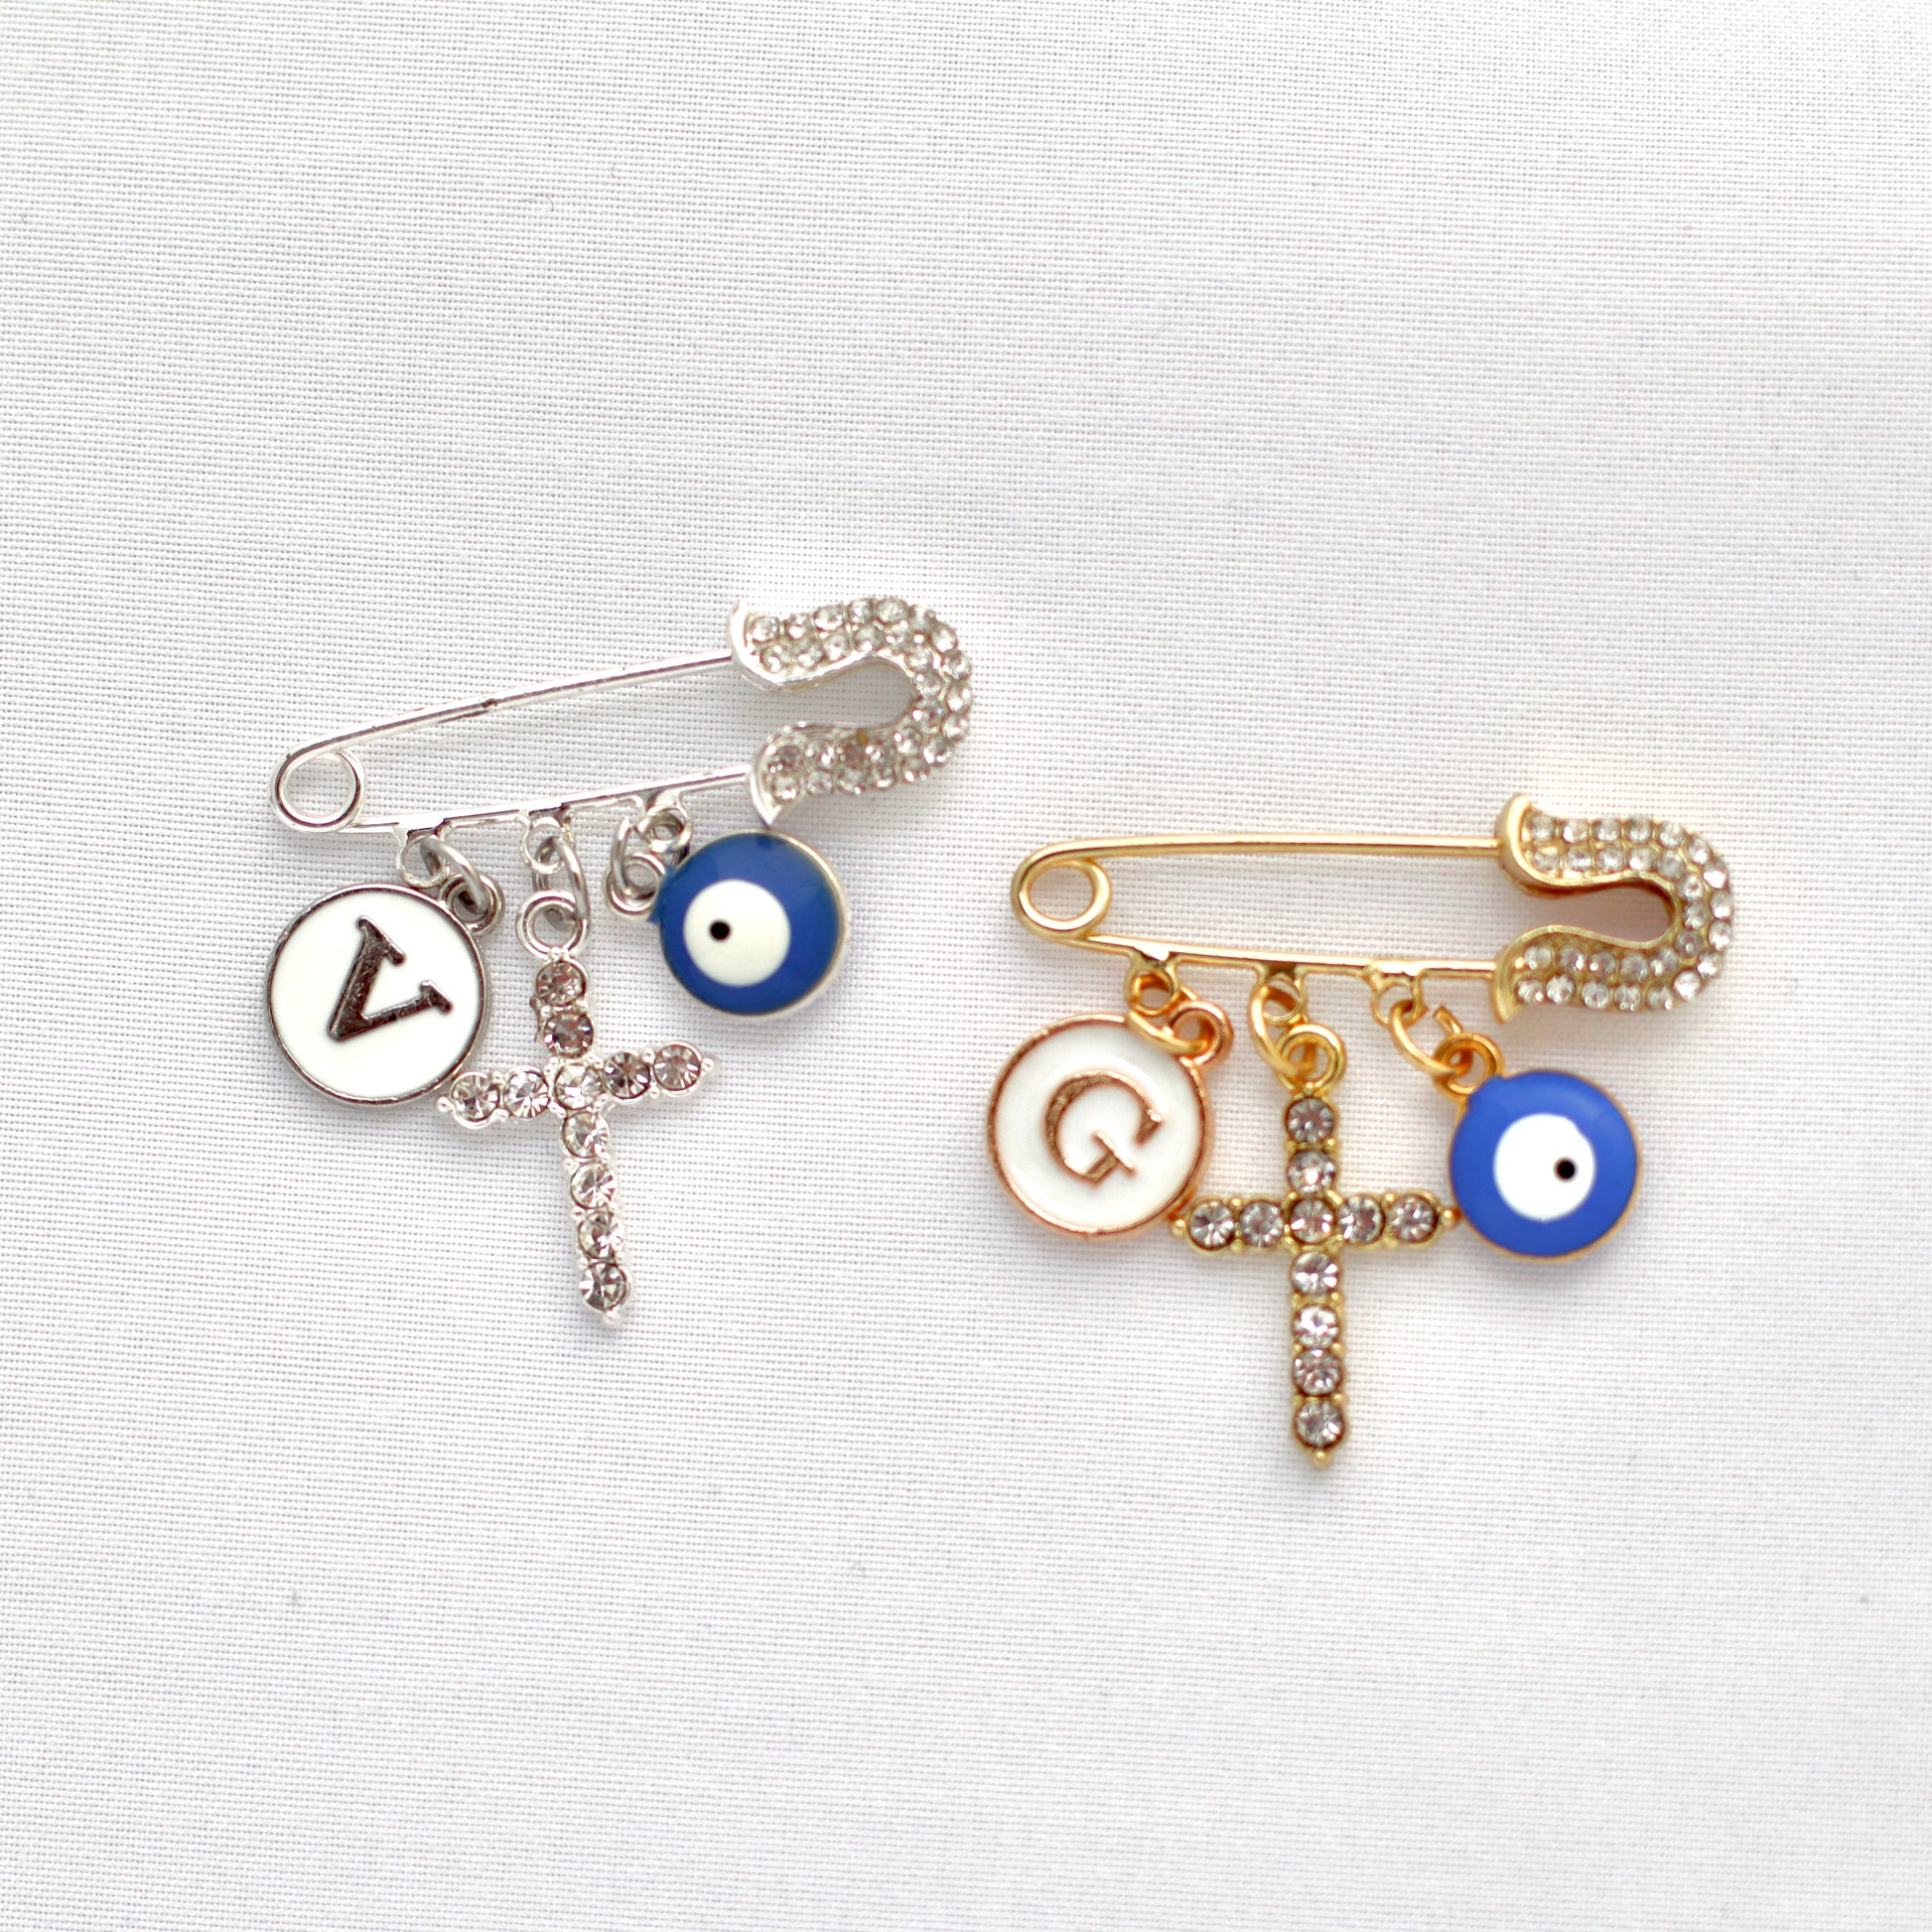 The Diamanté Evil Eye Baby Pin is meaningful gift for any new parent or baby shower, and a timeless keepsake that can be passed down from generation to generation.